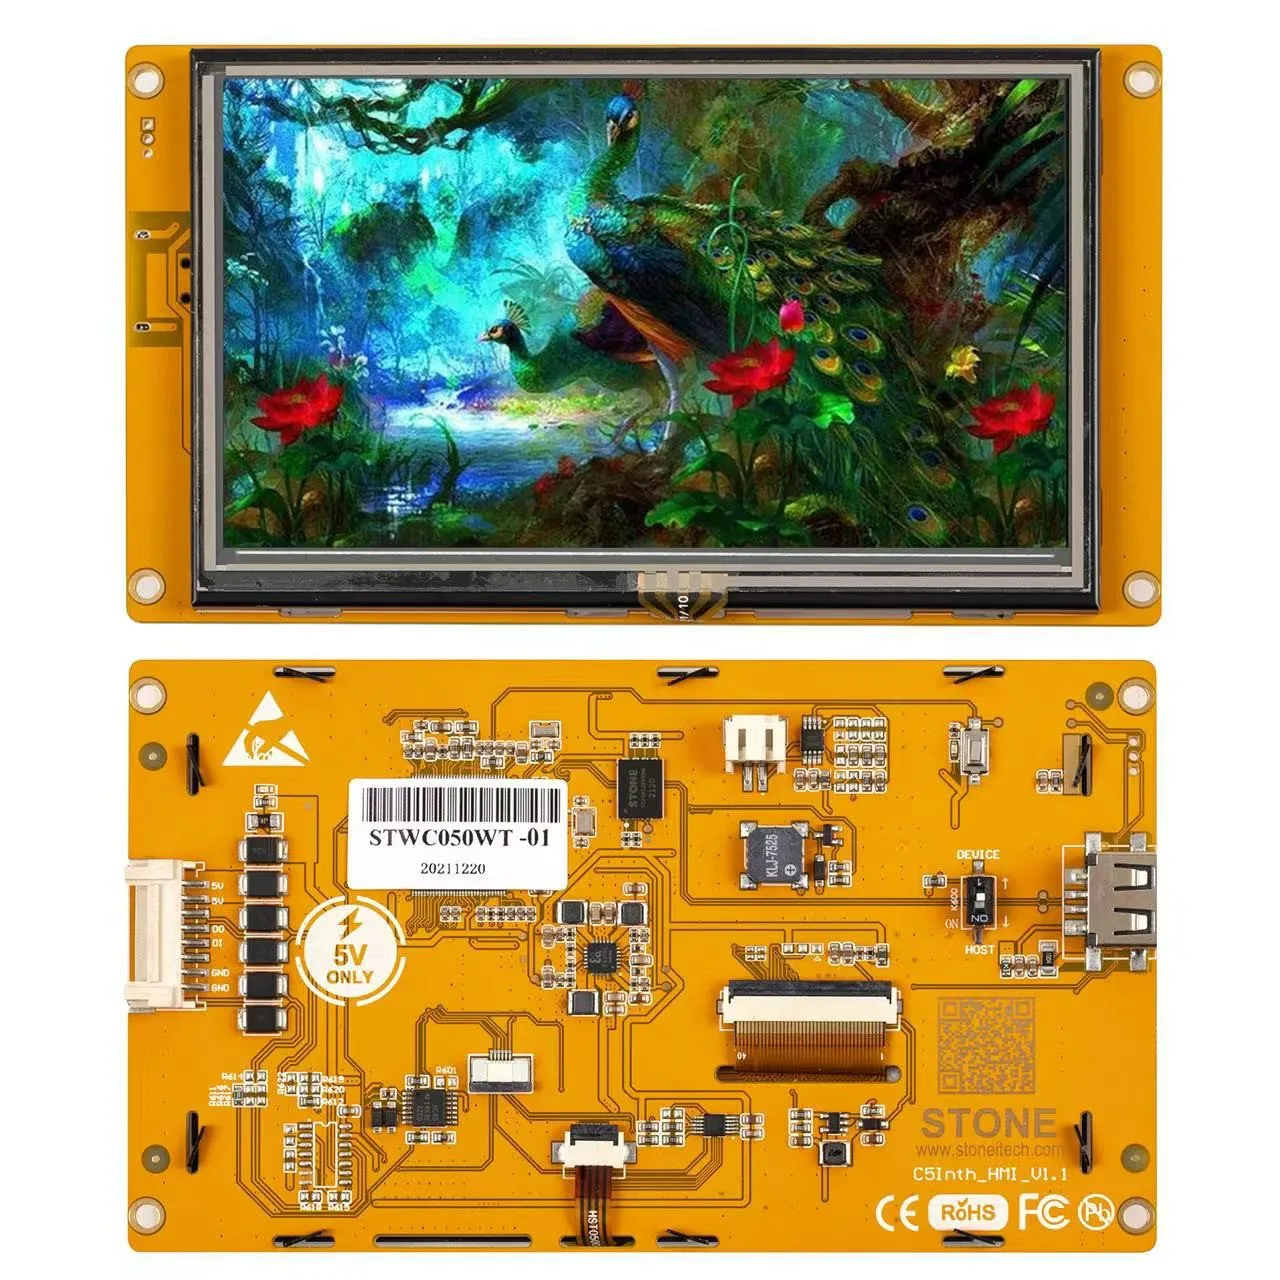 5 Inch HMI LCD Display RS232 TTL USB with Controller Board + GUI Program +Resistive Touchscreen for Industry